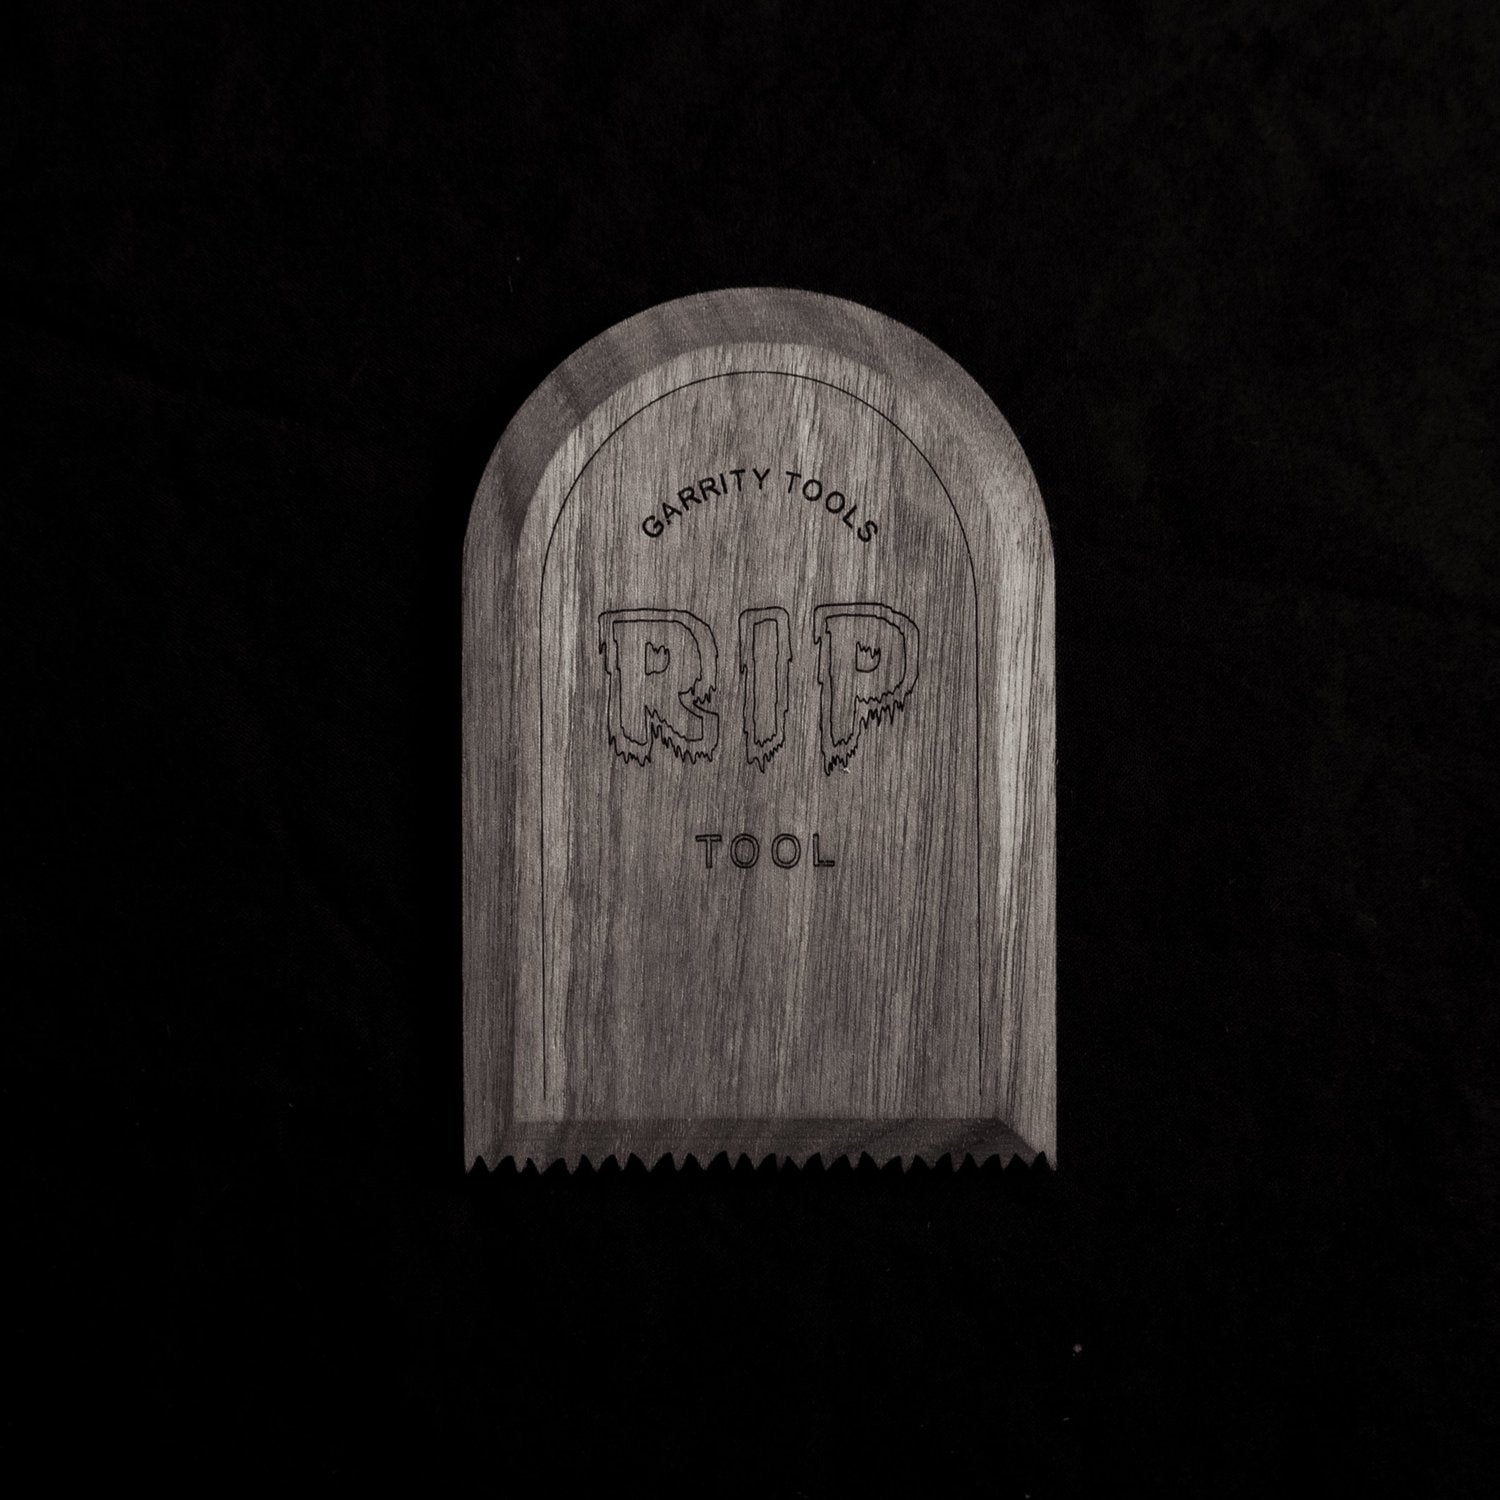 Tombstone RIP Tool-Limited Edition - Great White North Pottery Supplies